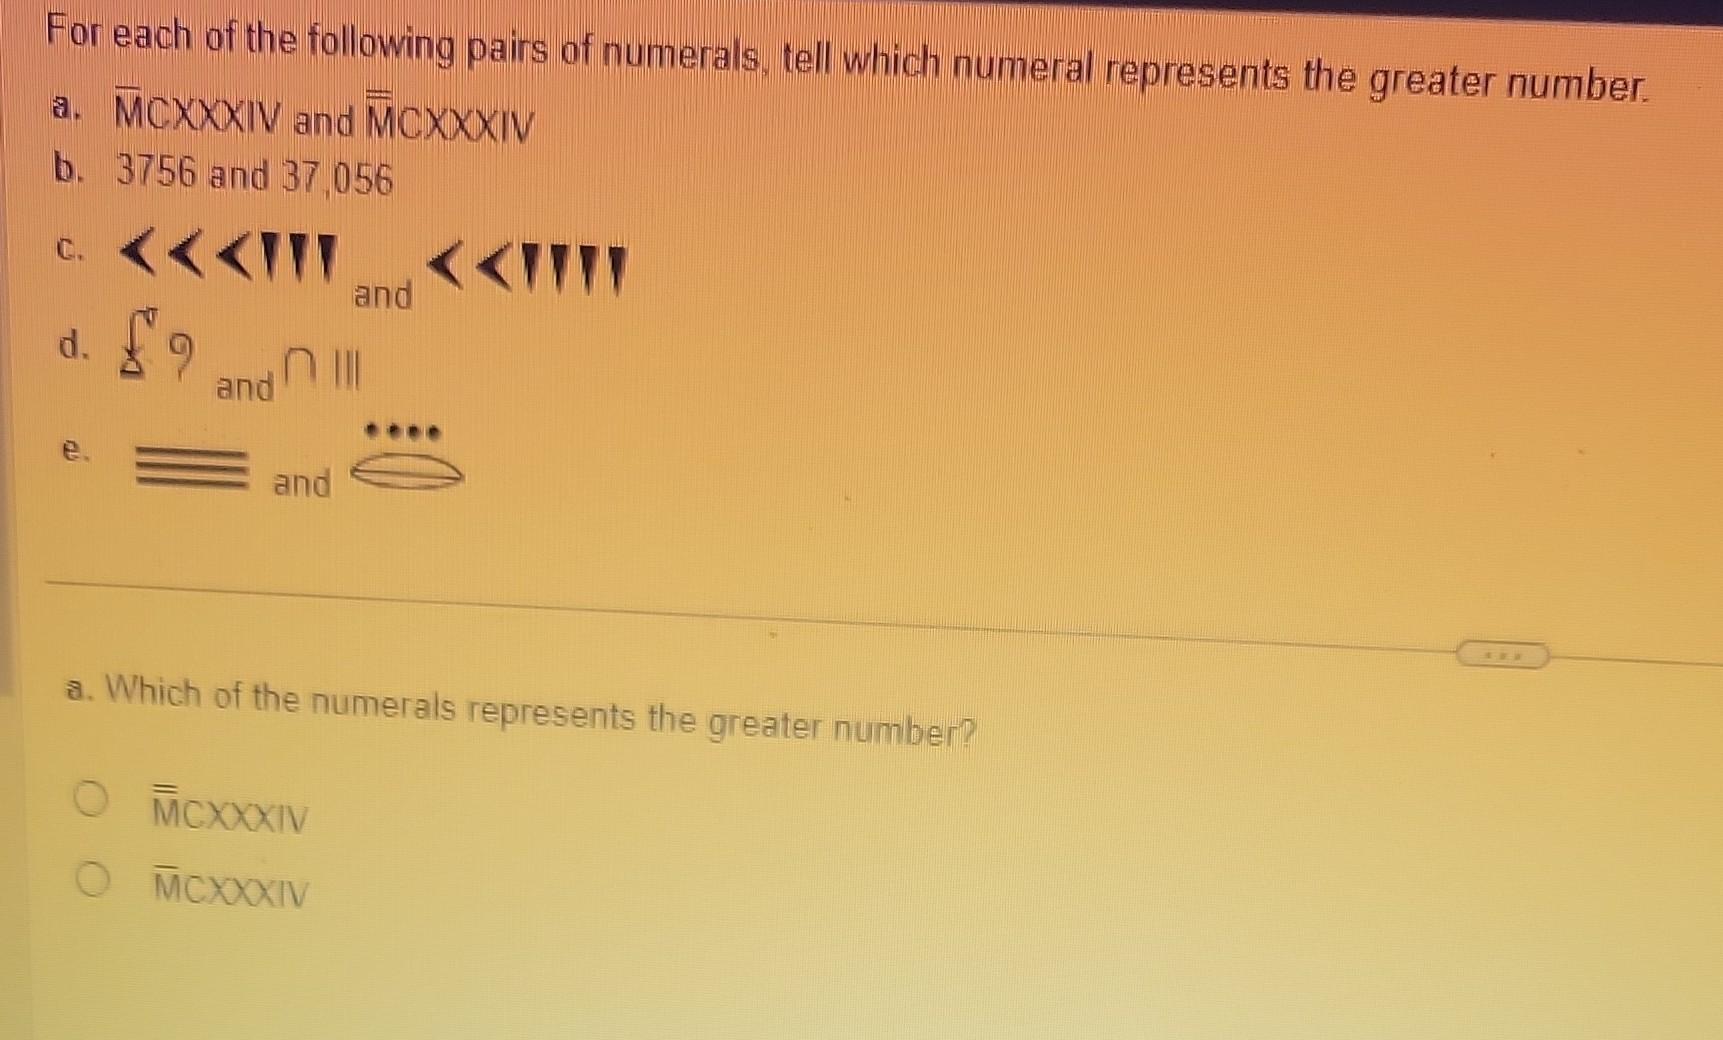 For each of the following pairs of numerals, tell which numeral represents the greater number.a. ( overline{mathrm{M} C X